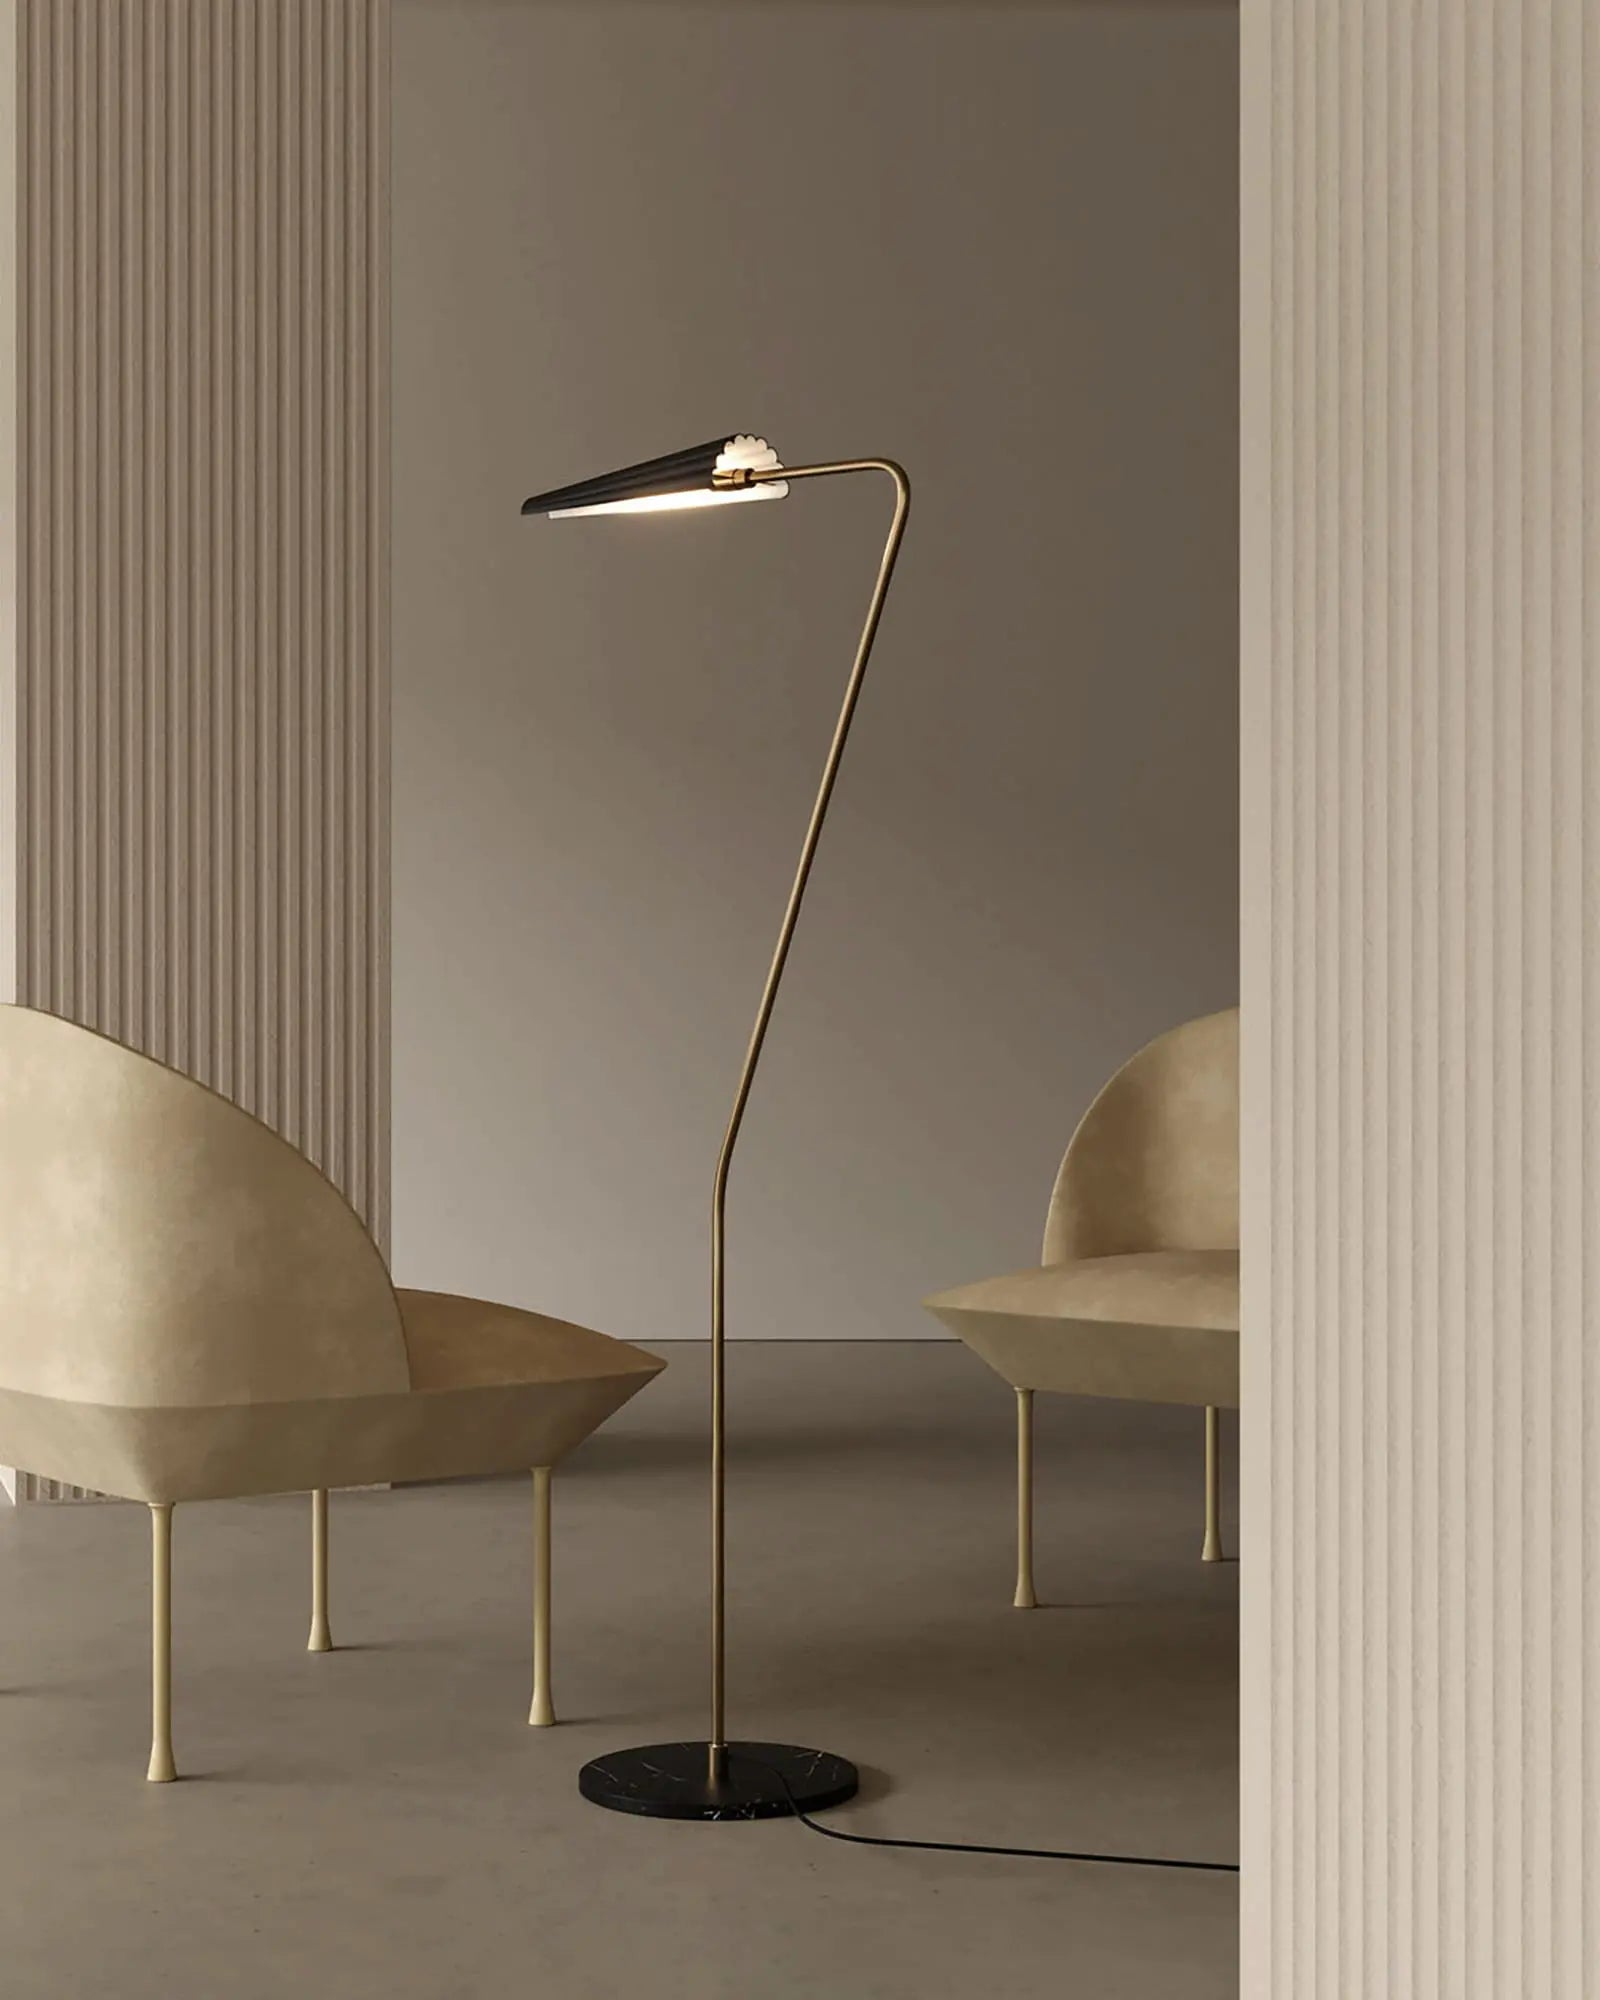 Bion contemporary floor lamp with corrugated steel shade in living room